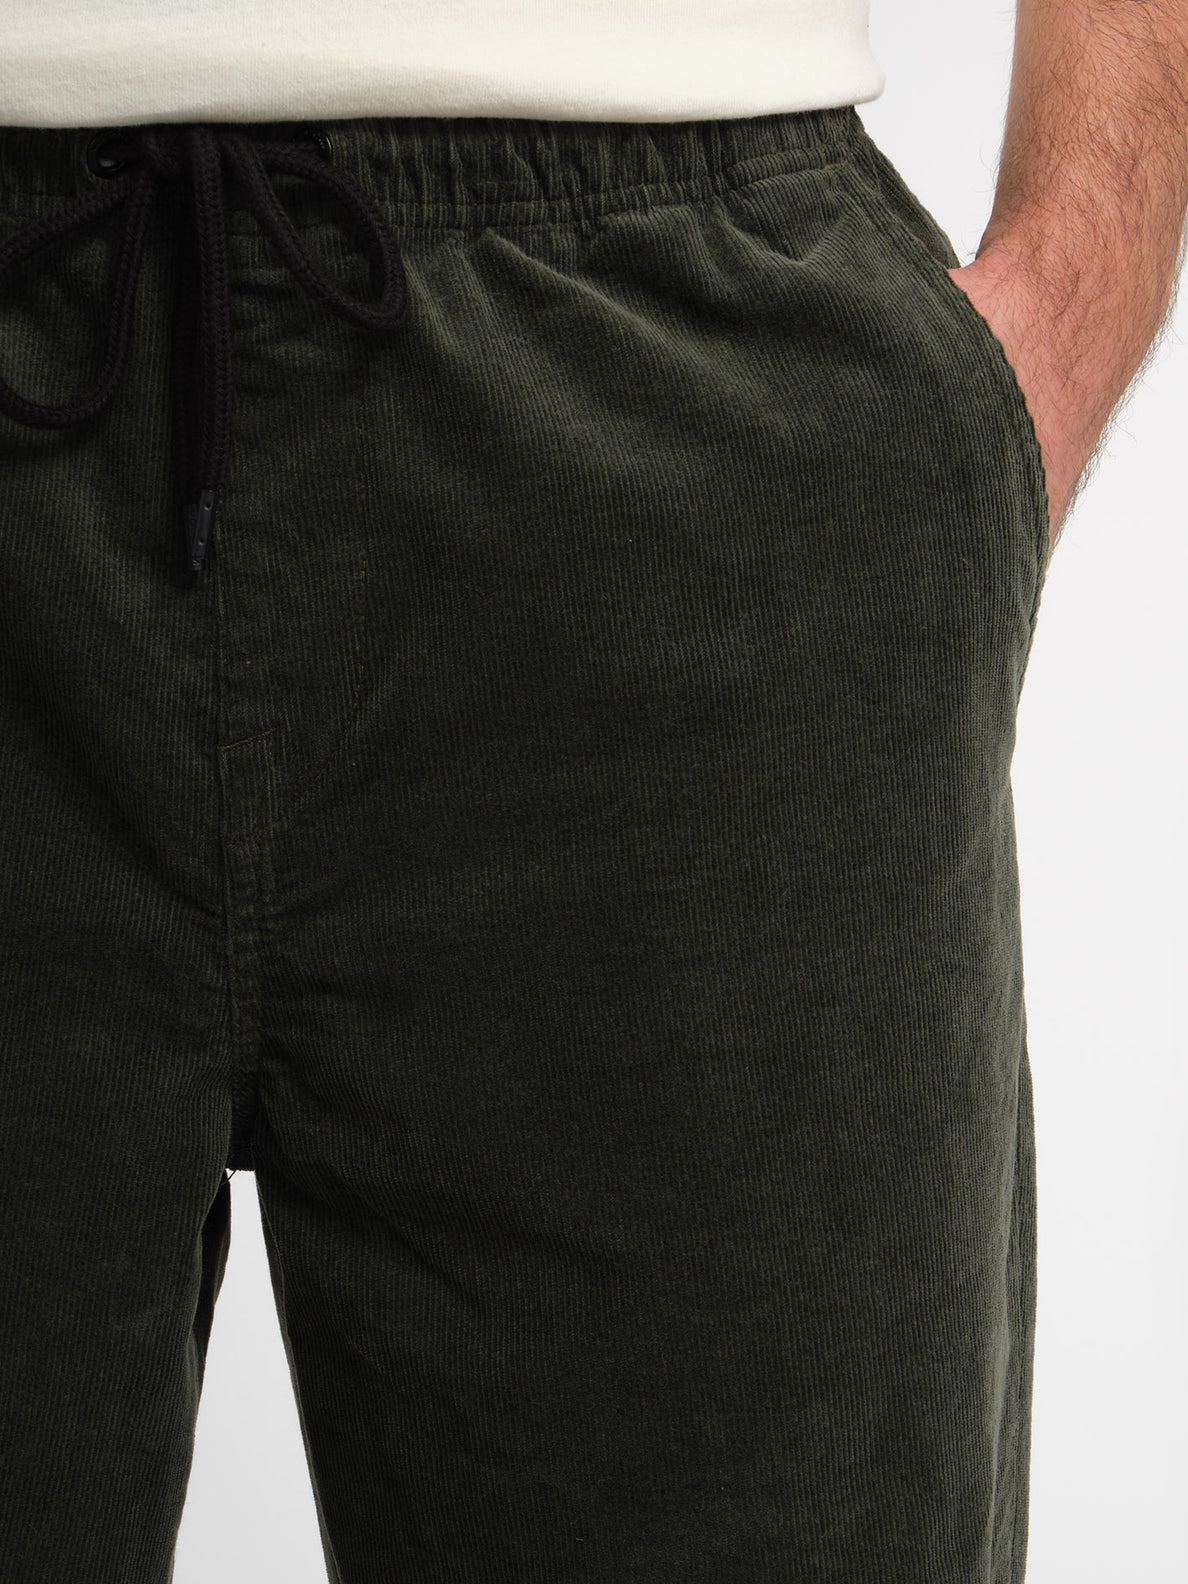 Outer Spaced Casual Pant - Squadron Green